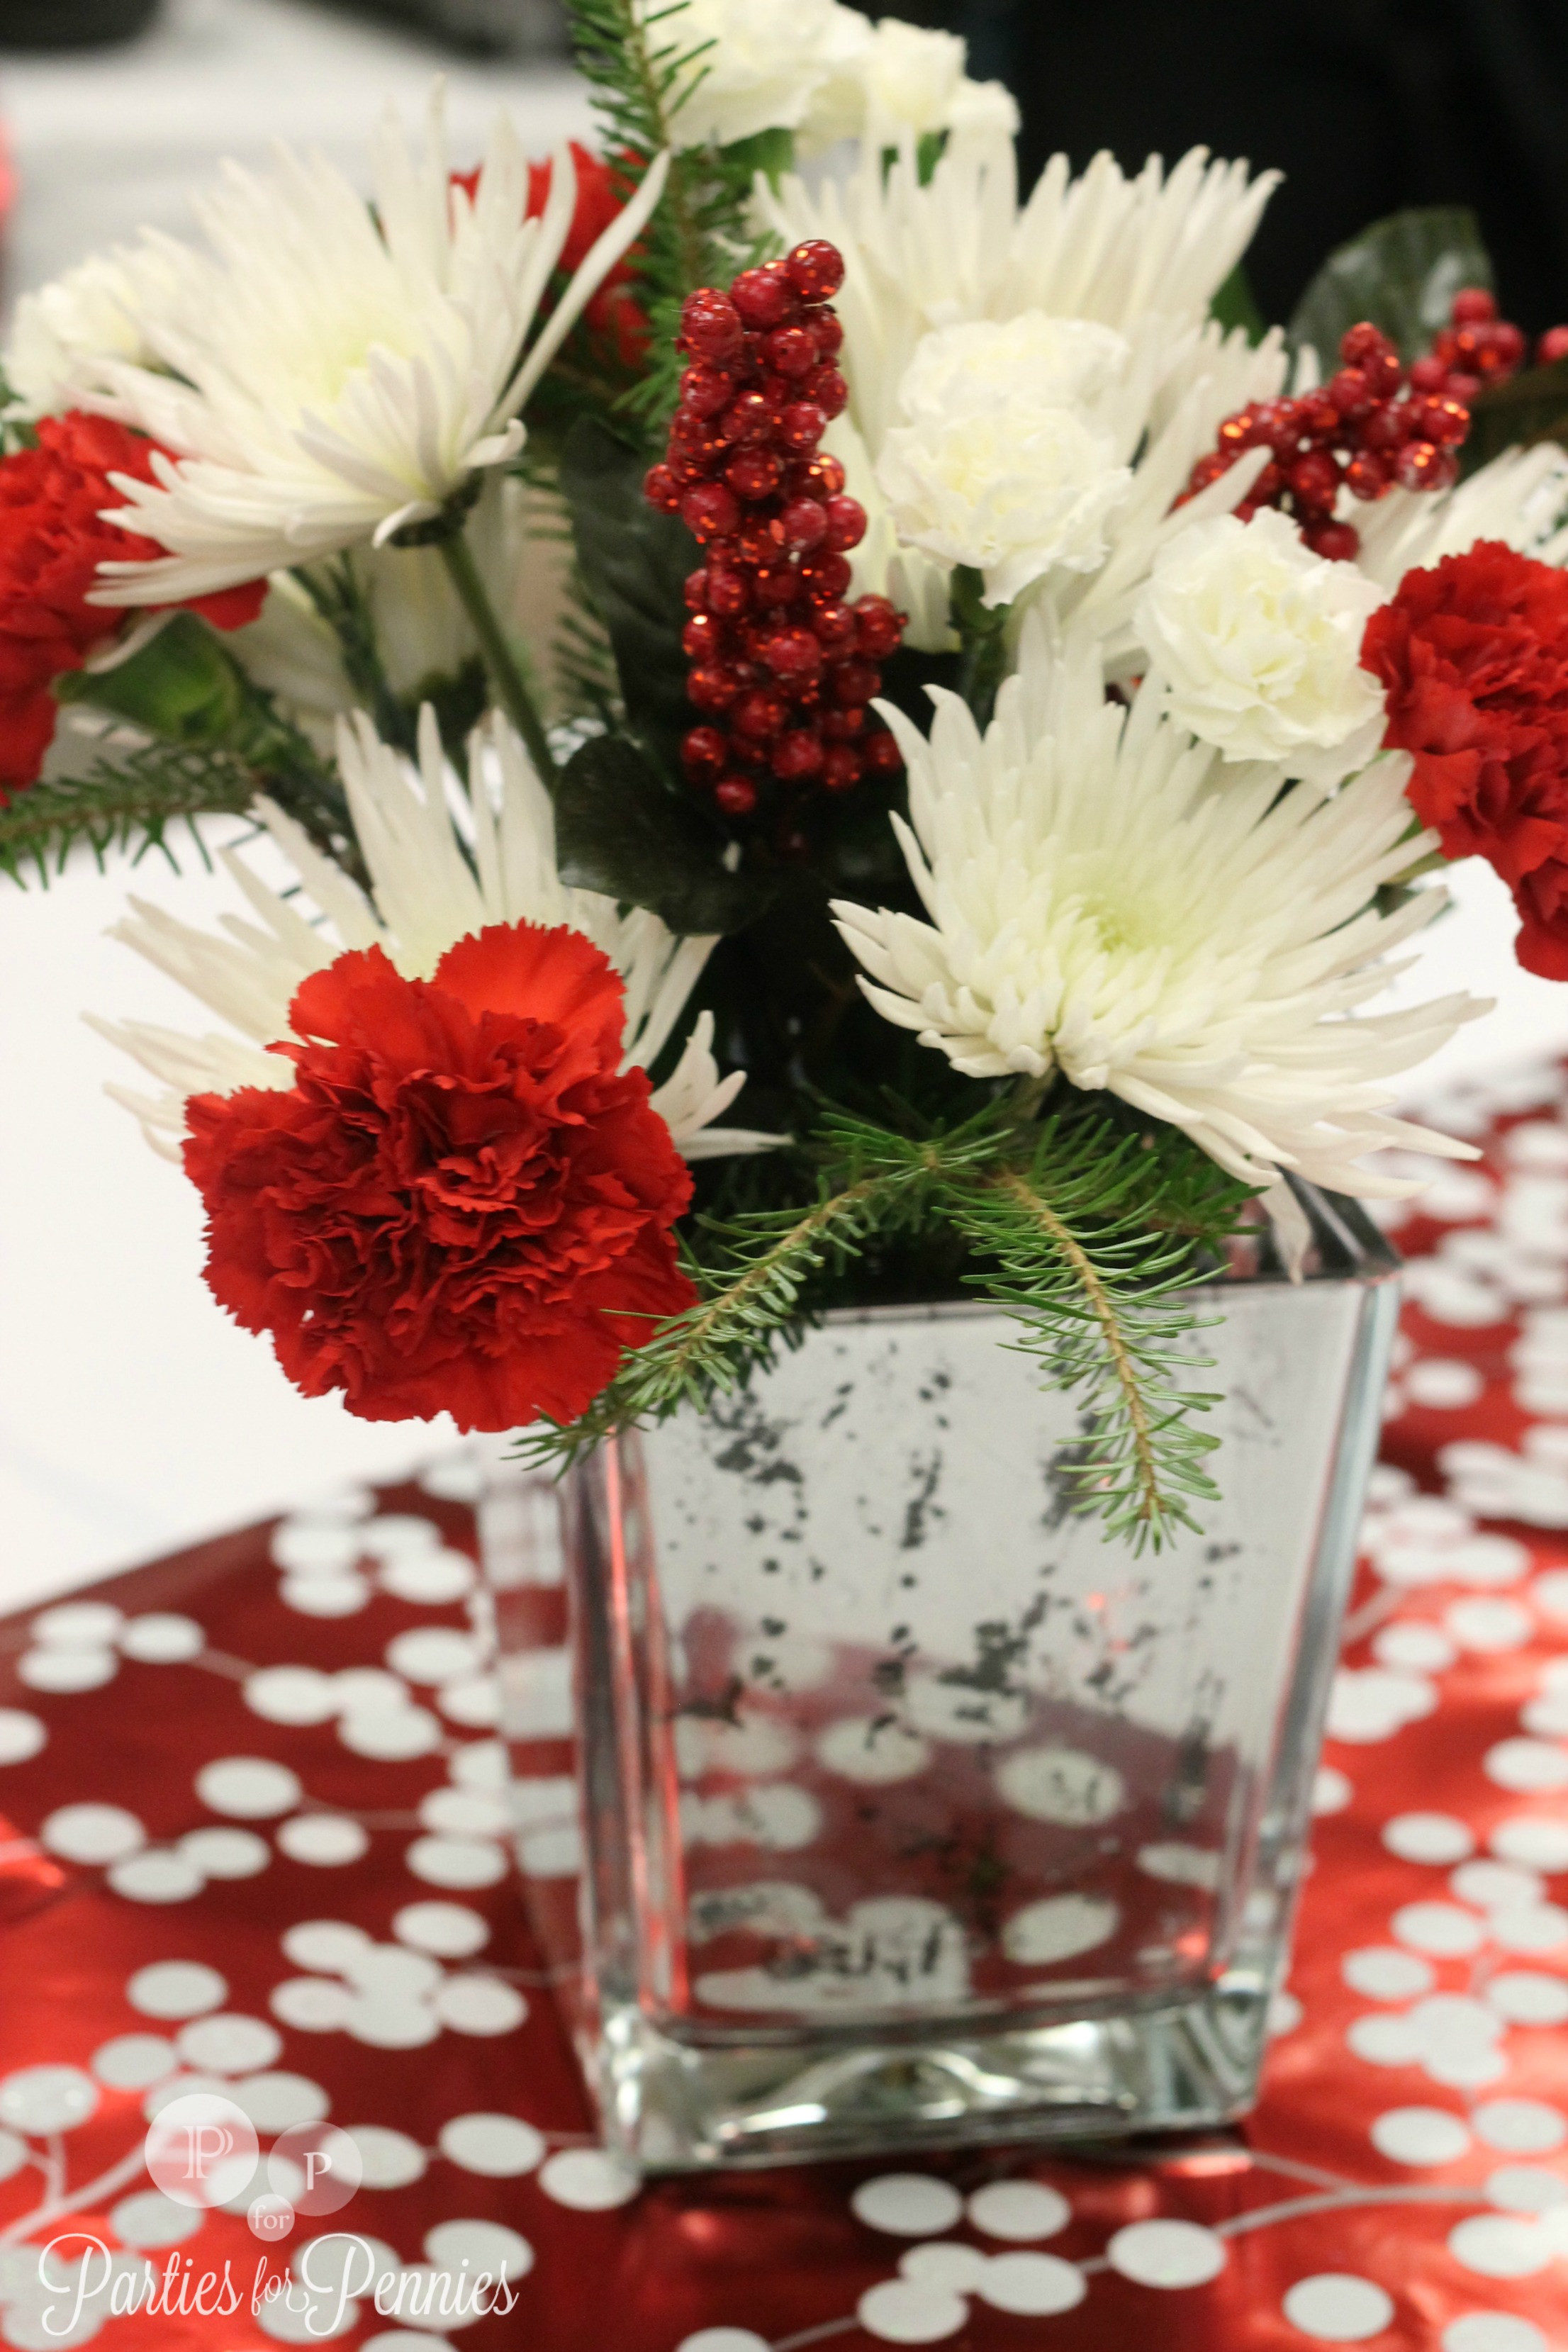 Holiday Party Centerpiece Ideas
 Christmas Party Ideas at work Parties for